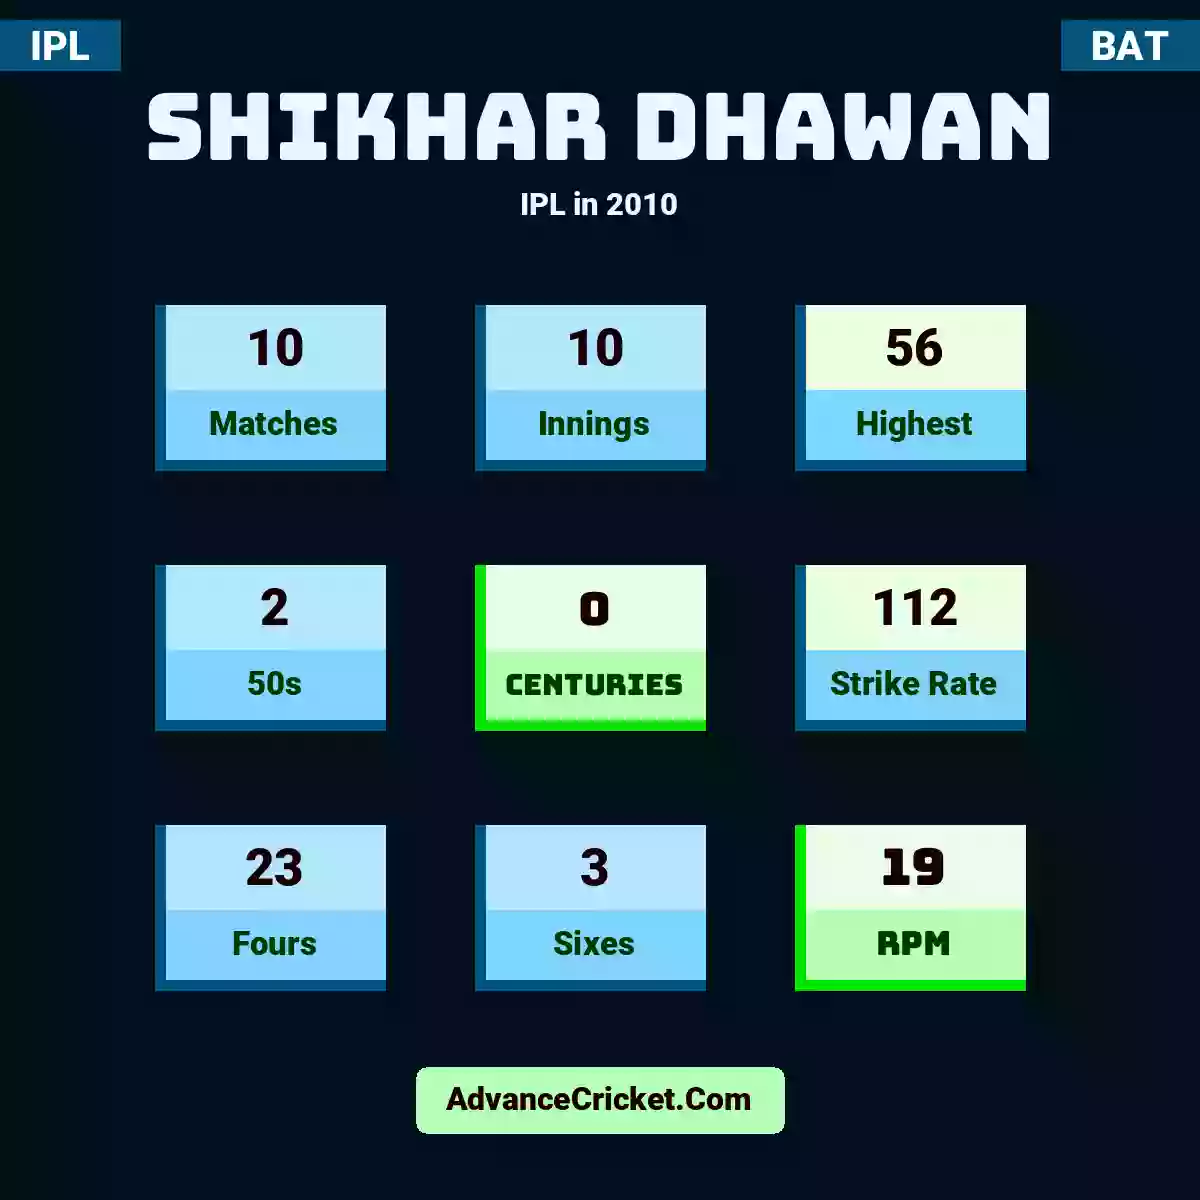 Shikhar Dhawan IPL  in 2010, Shikhar Dhawan played 10 matches, scored 56 runs as highest, 2 half-centuries, and 0 centuries, with a strike rate of 112. S.Dhawan hit 23 fours and 3 sixes, with an RPM of 19.